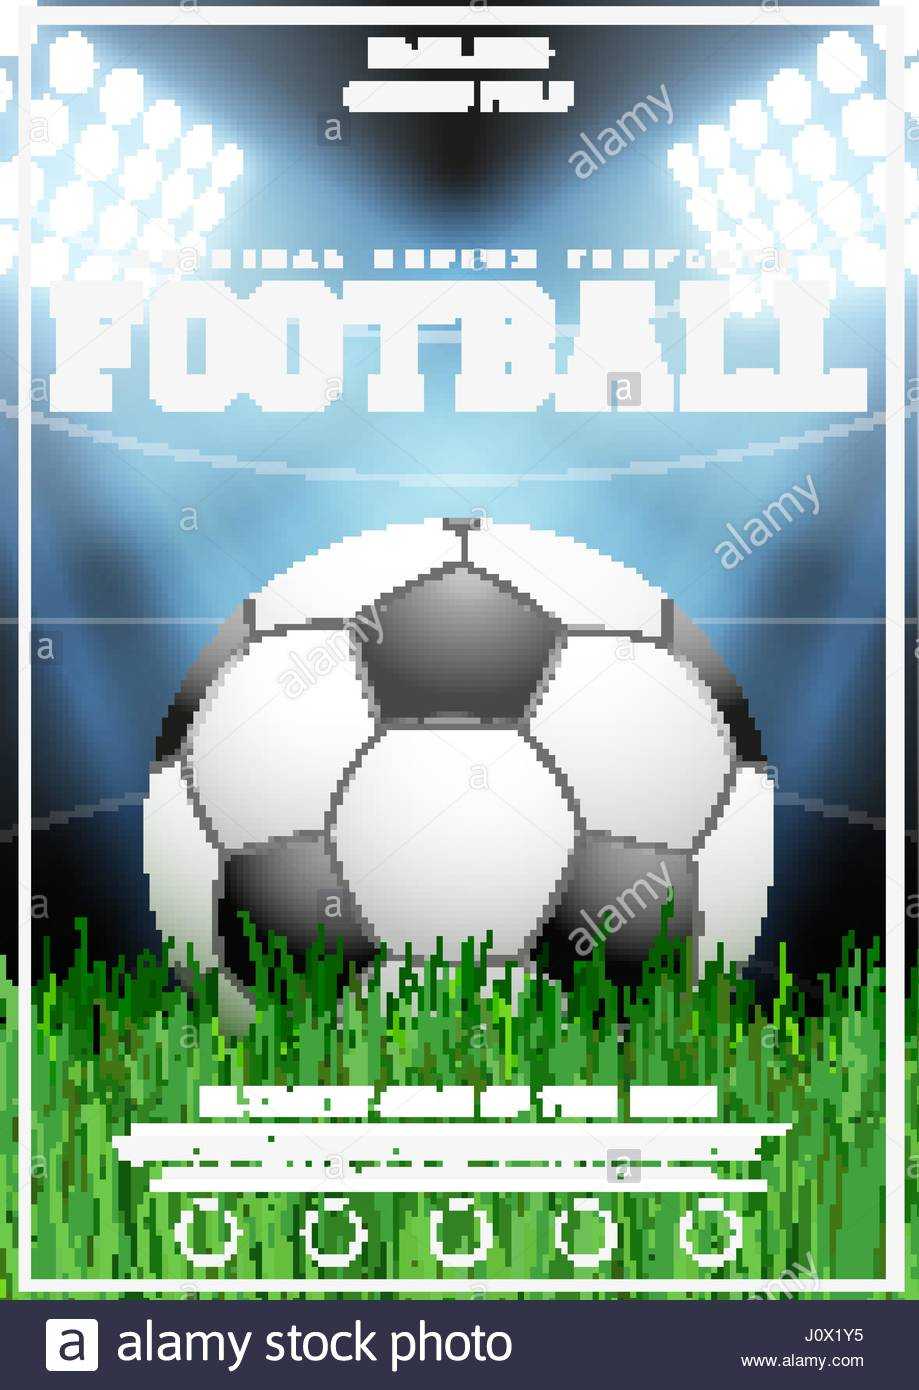 Poster Template Of Football Tournament Stock Vector Art Intended For Football Tournament Flyer Template